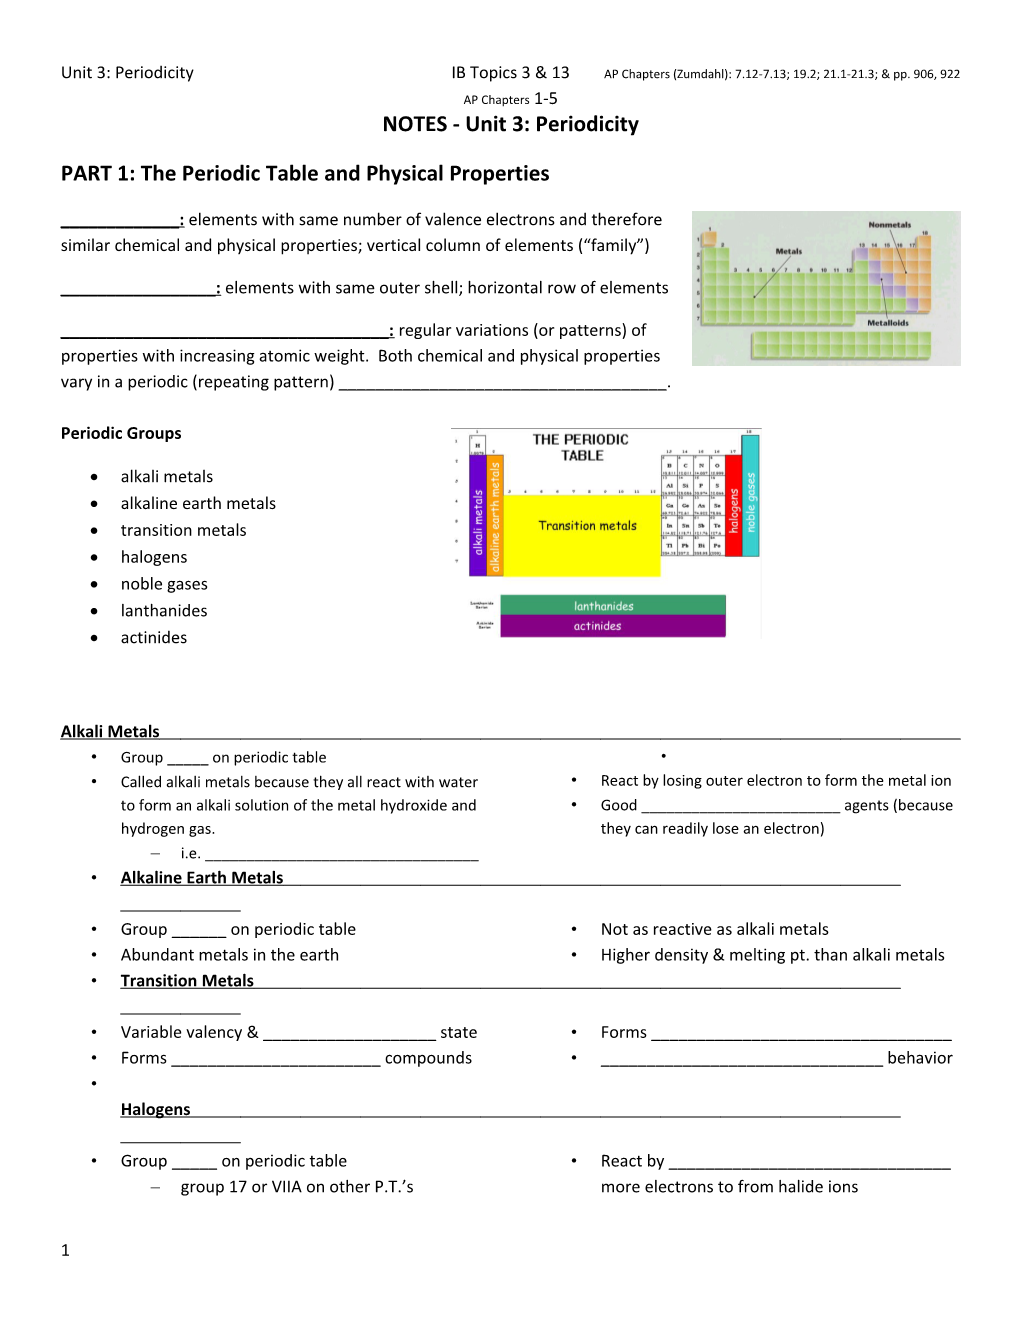 PART 1: the Periodic Table and Physical Properties